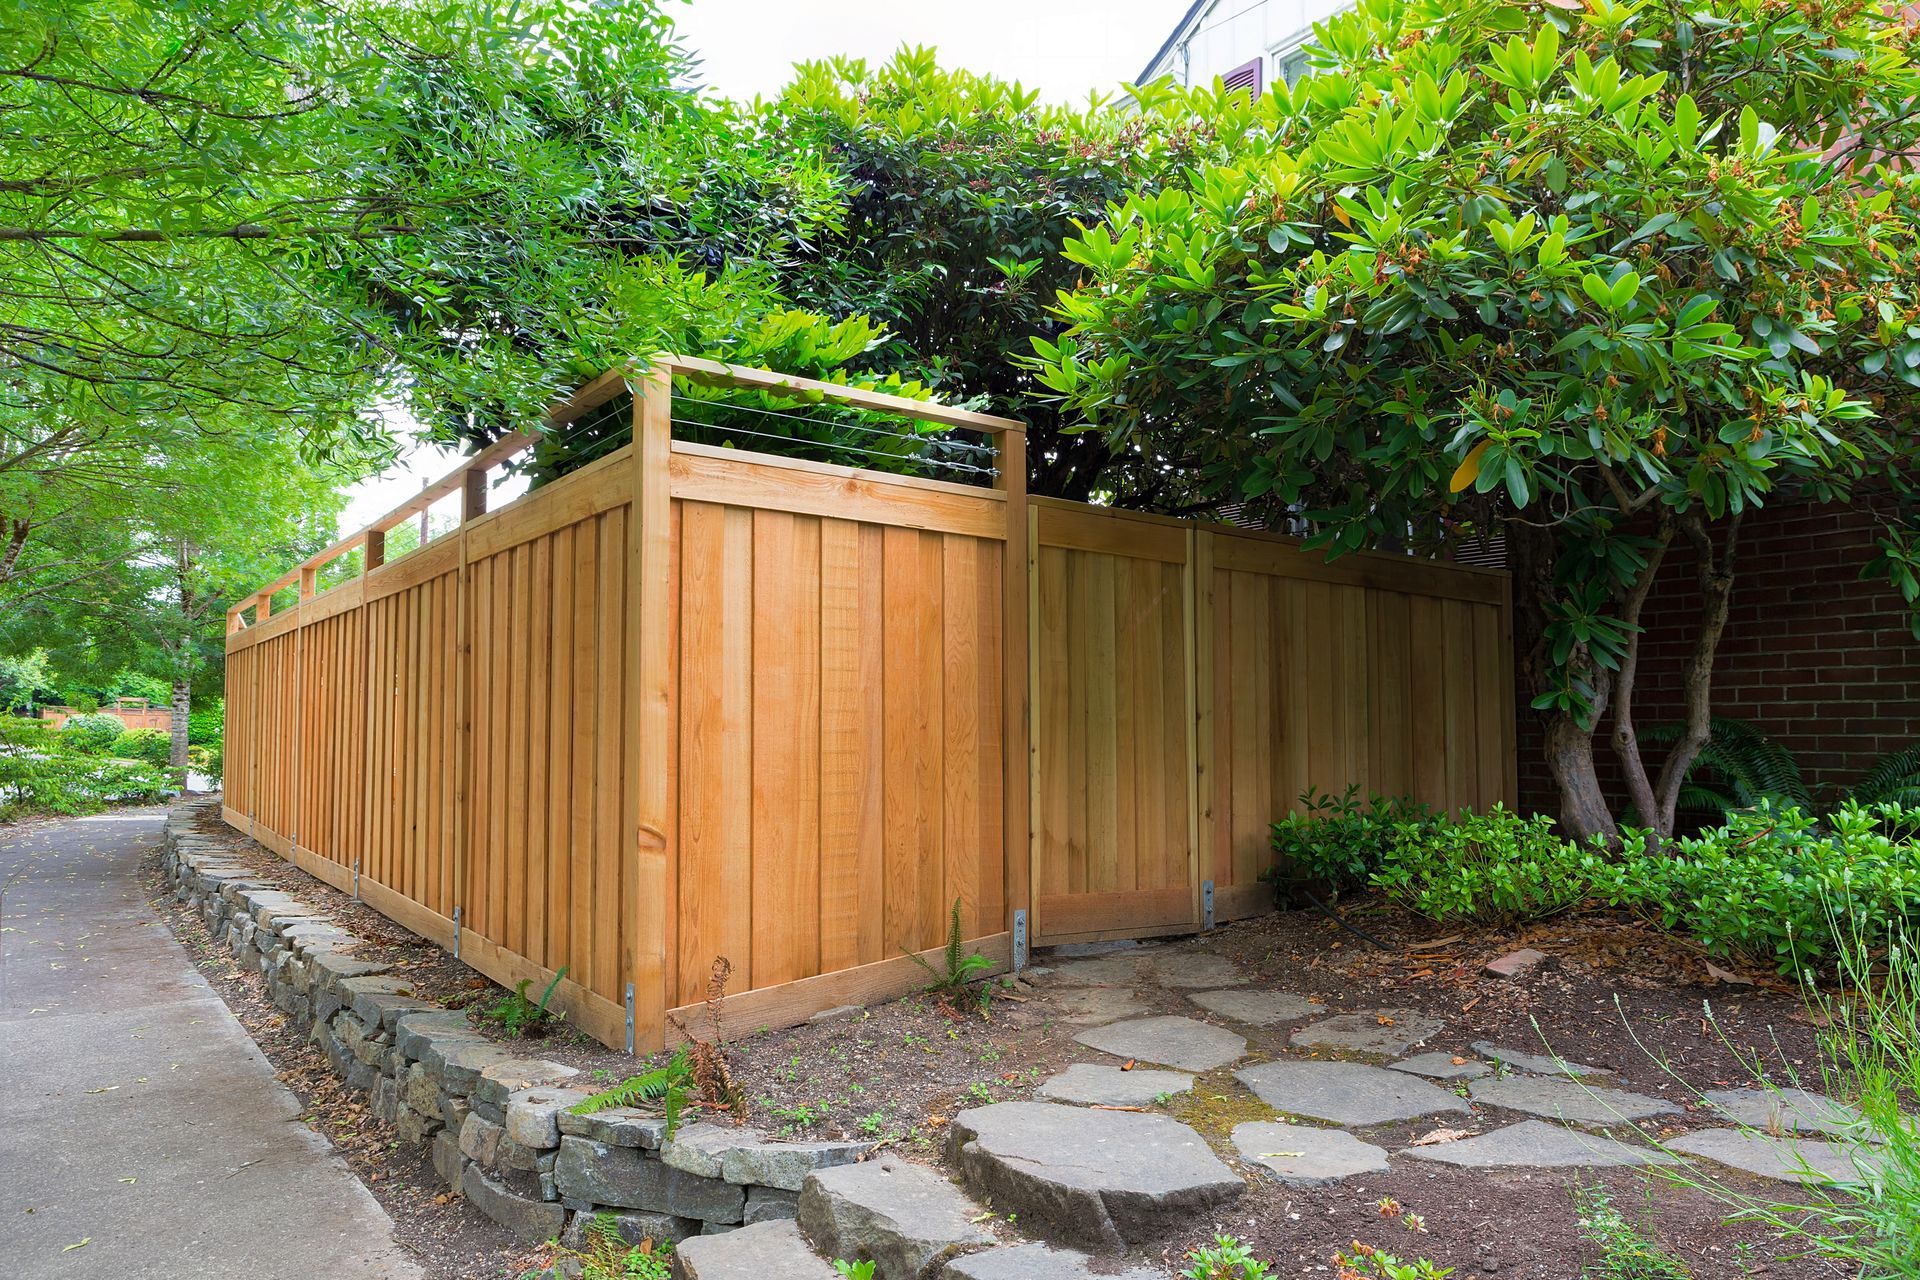 Freshly installed cedar wood fencing bordering the side yard, exuding a natural and rustic charm.